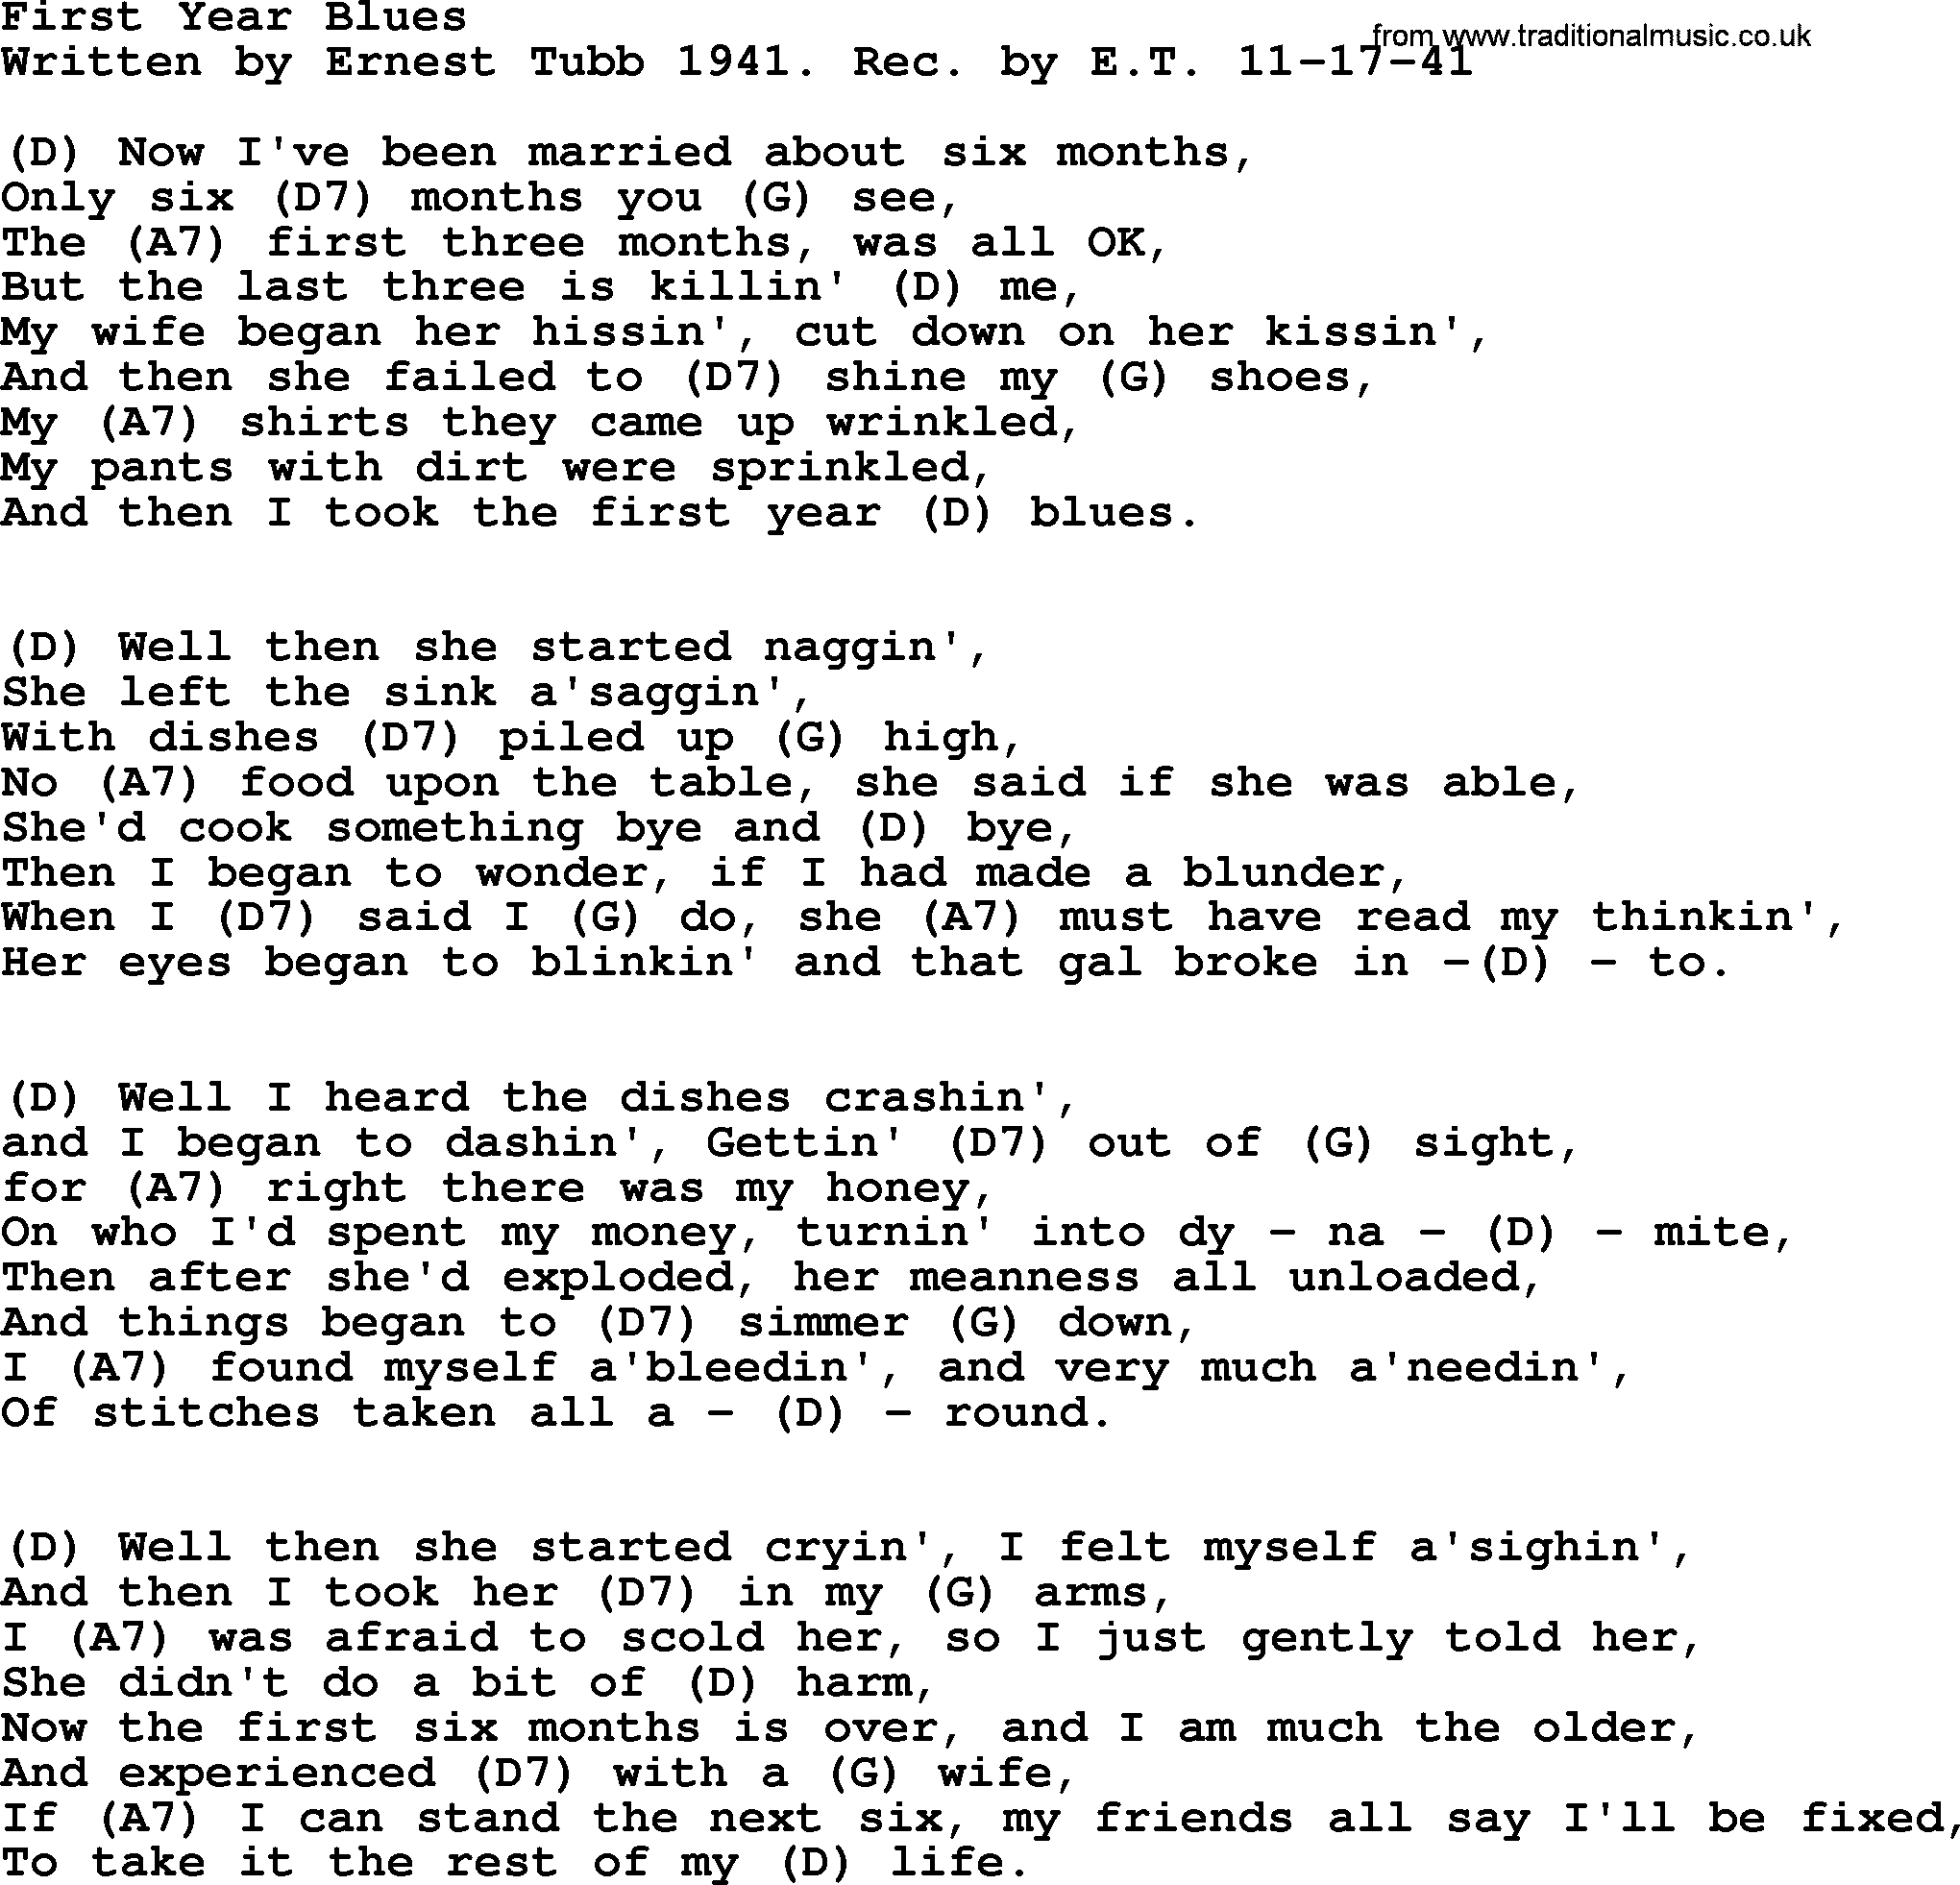 Hank Williams song First Year Blues, lyrics and chords